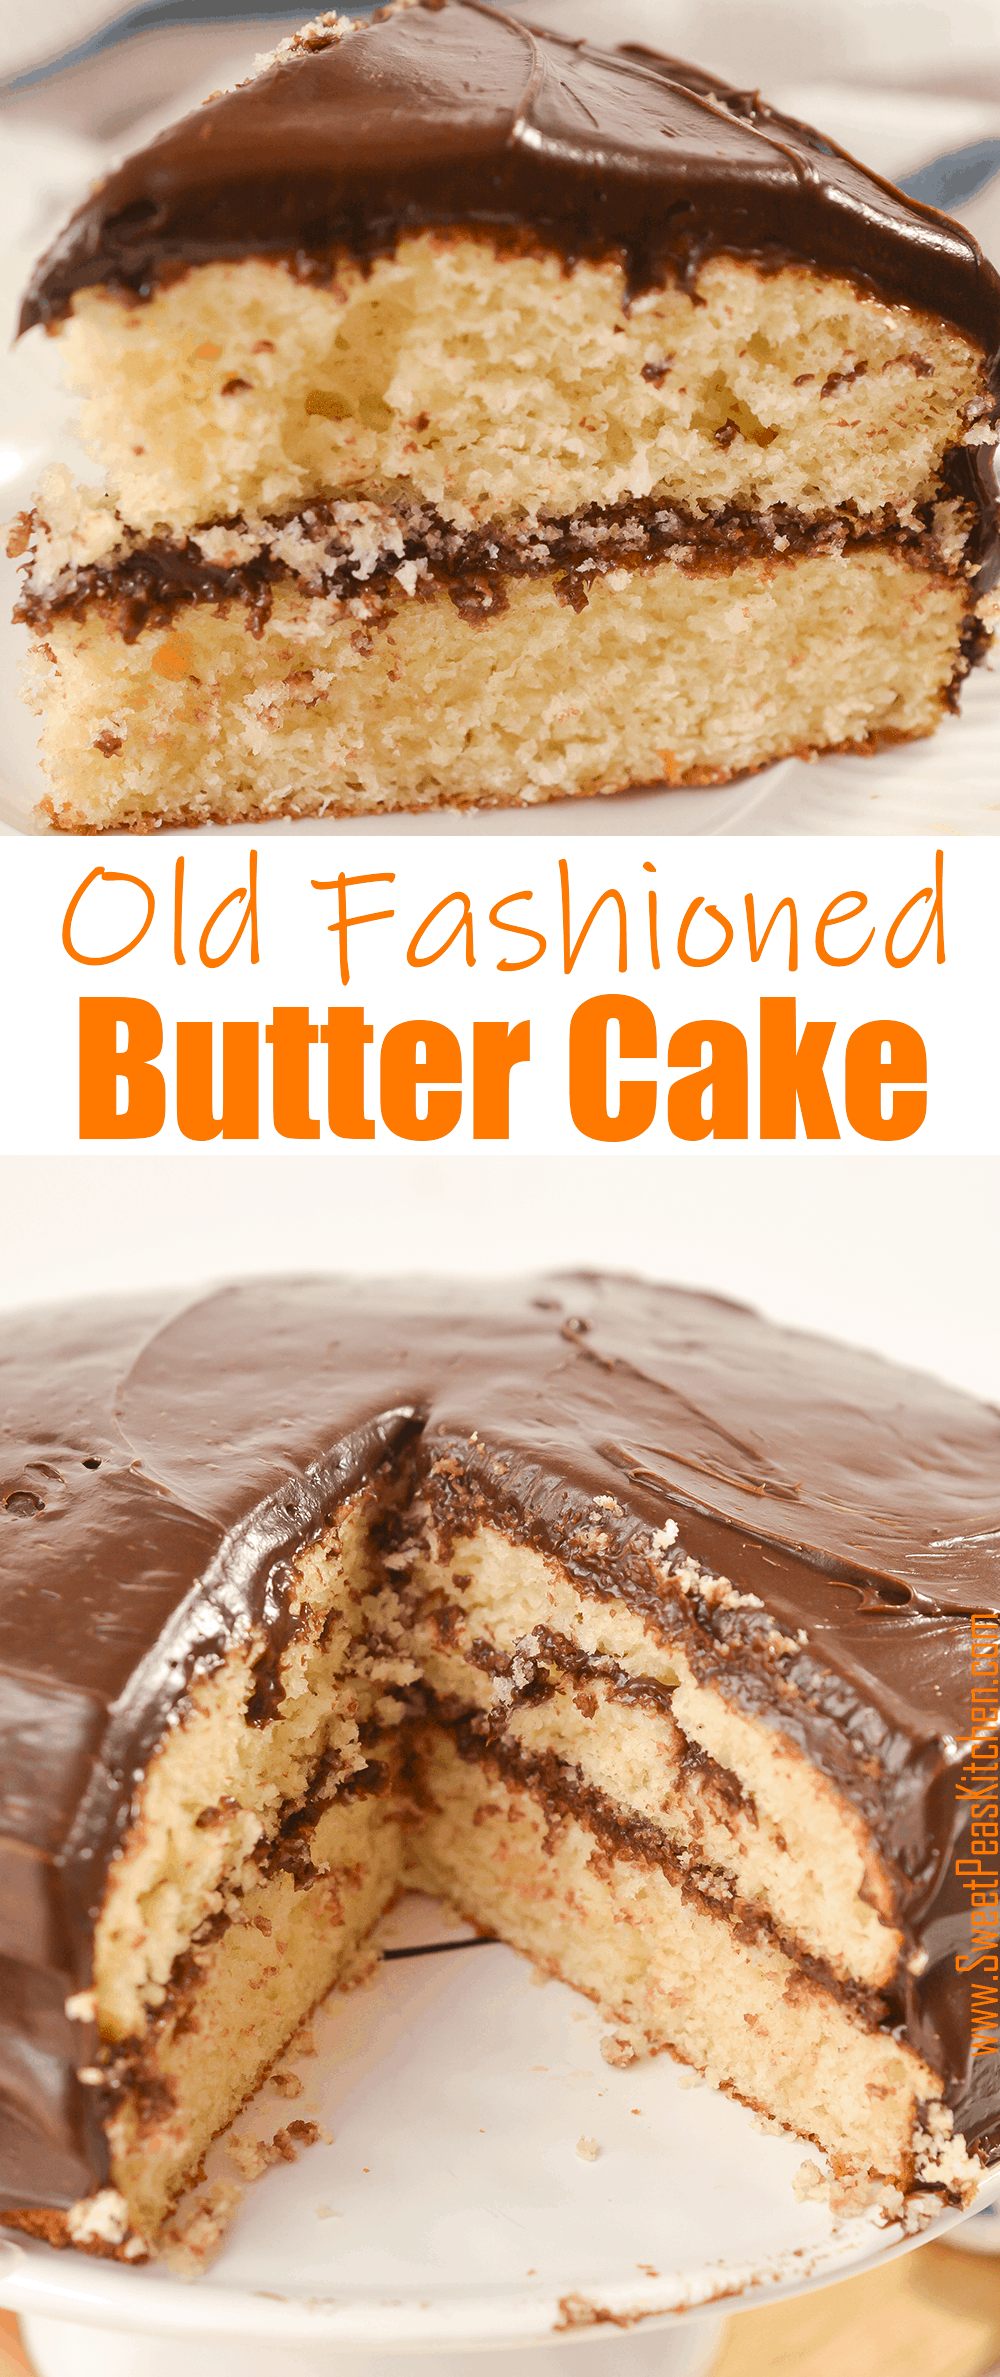 Old Fashioned Butter Cake on Pinterest